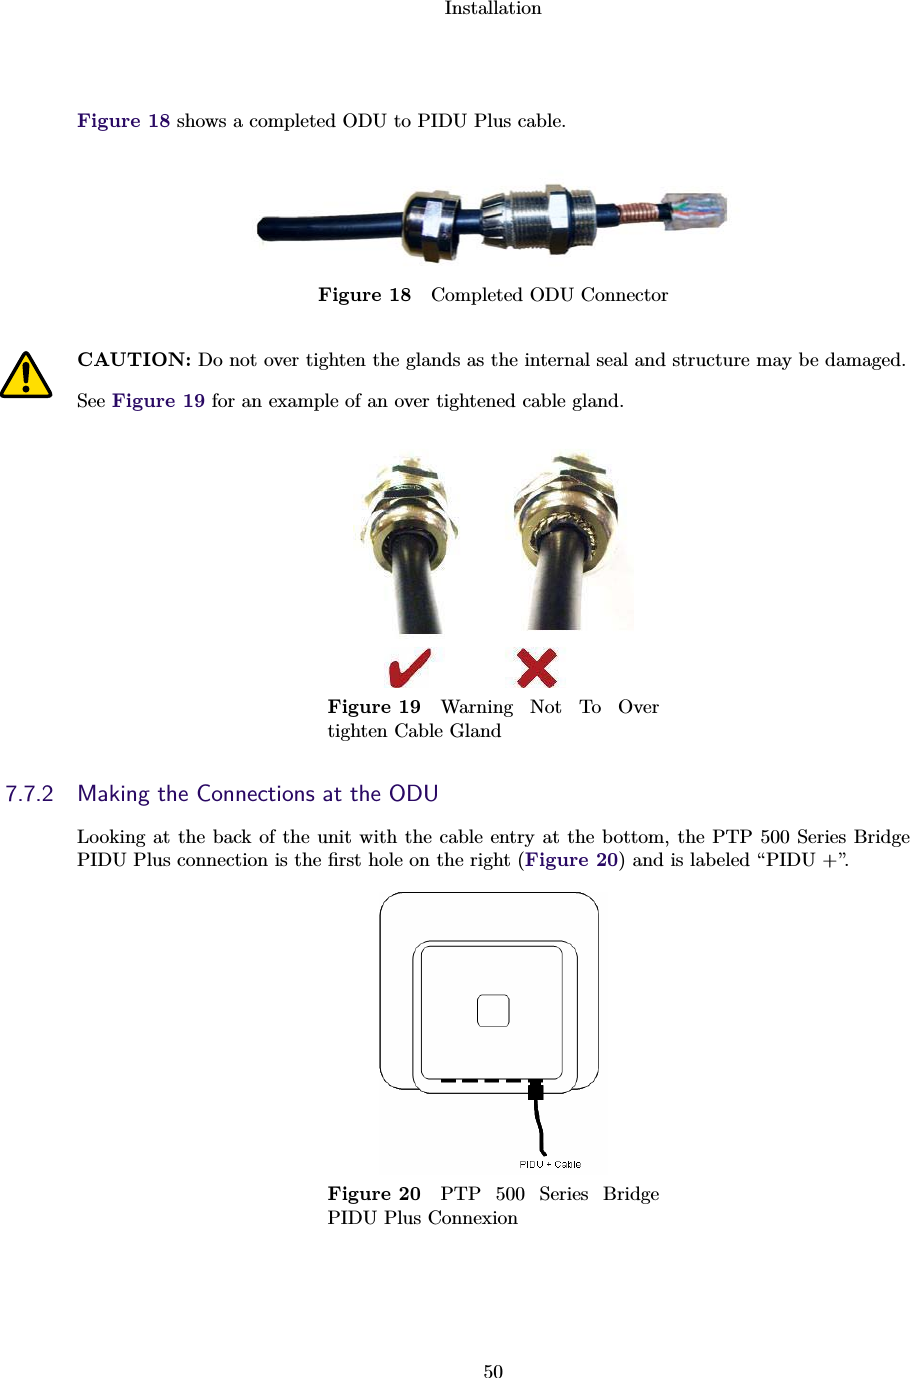 Installation50Figure 18 shows a completed ODU to PIDU Plus cable.Figure 18 Completed ODU ConnectorCAUTION: Do not over tighten the glands as the internal seal and structure may be damaged.See Figure 19 for an example of an over tightened cable gland.Figure 19 Warning Not To Overtighten Cable Gland7.7.2 Making the Connections at the ODULooking at the back of the unit with the cable entry at the bottom, the PTP 500 Series BridgePIDU Plus connection is the ﬁrst hole on the right (Figure 20) and is labeled “PIDU +”.Figure 20 PTP 500 Series BridgePIDU Plus Connexion